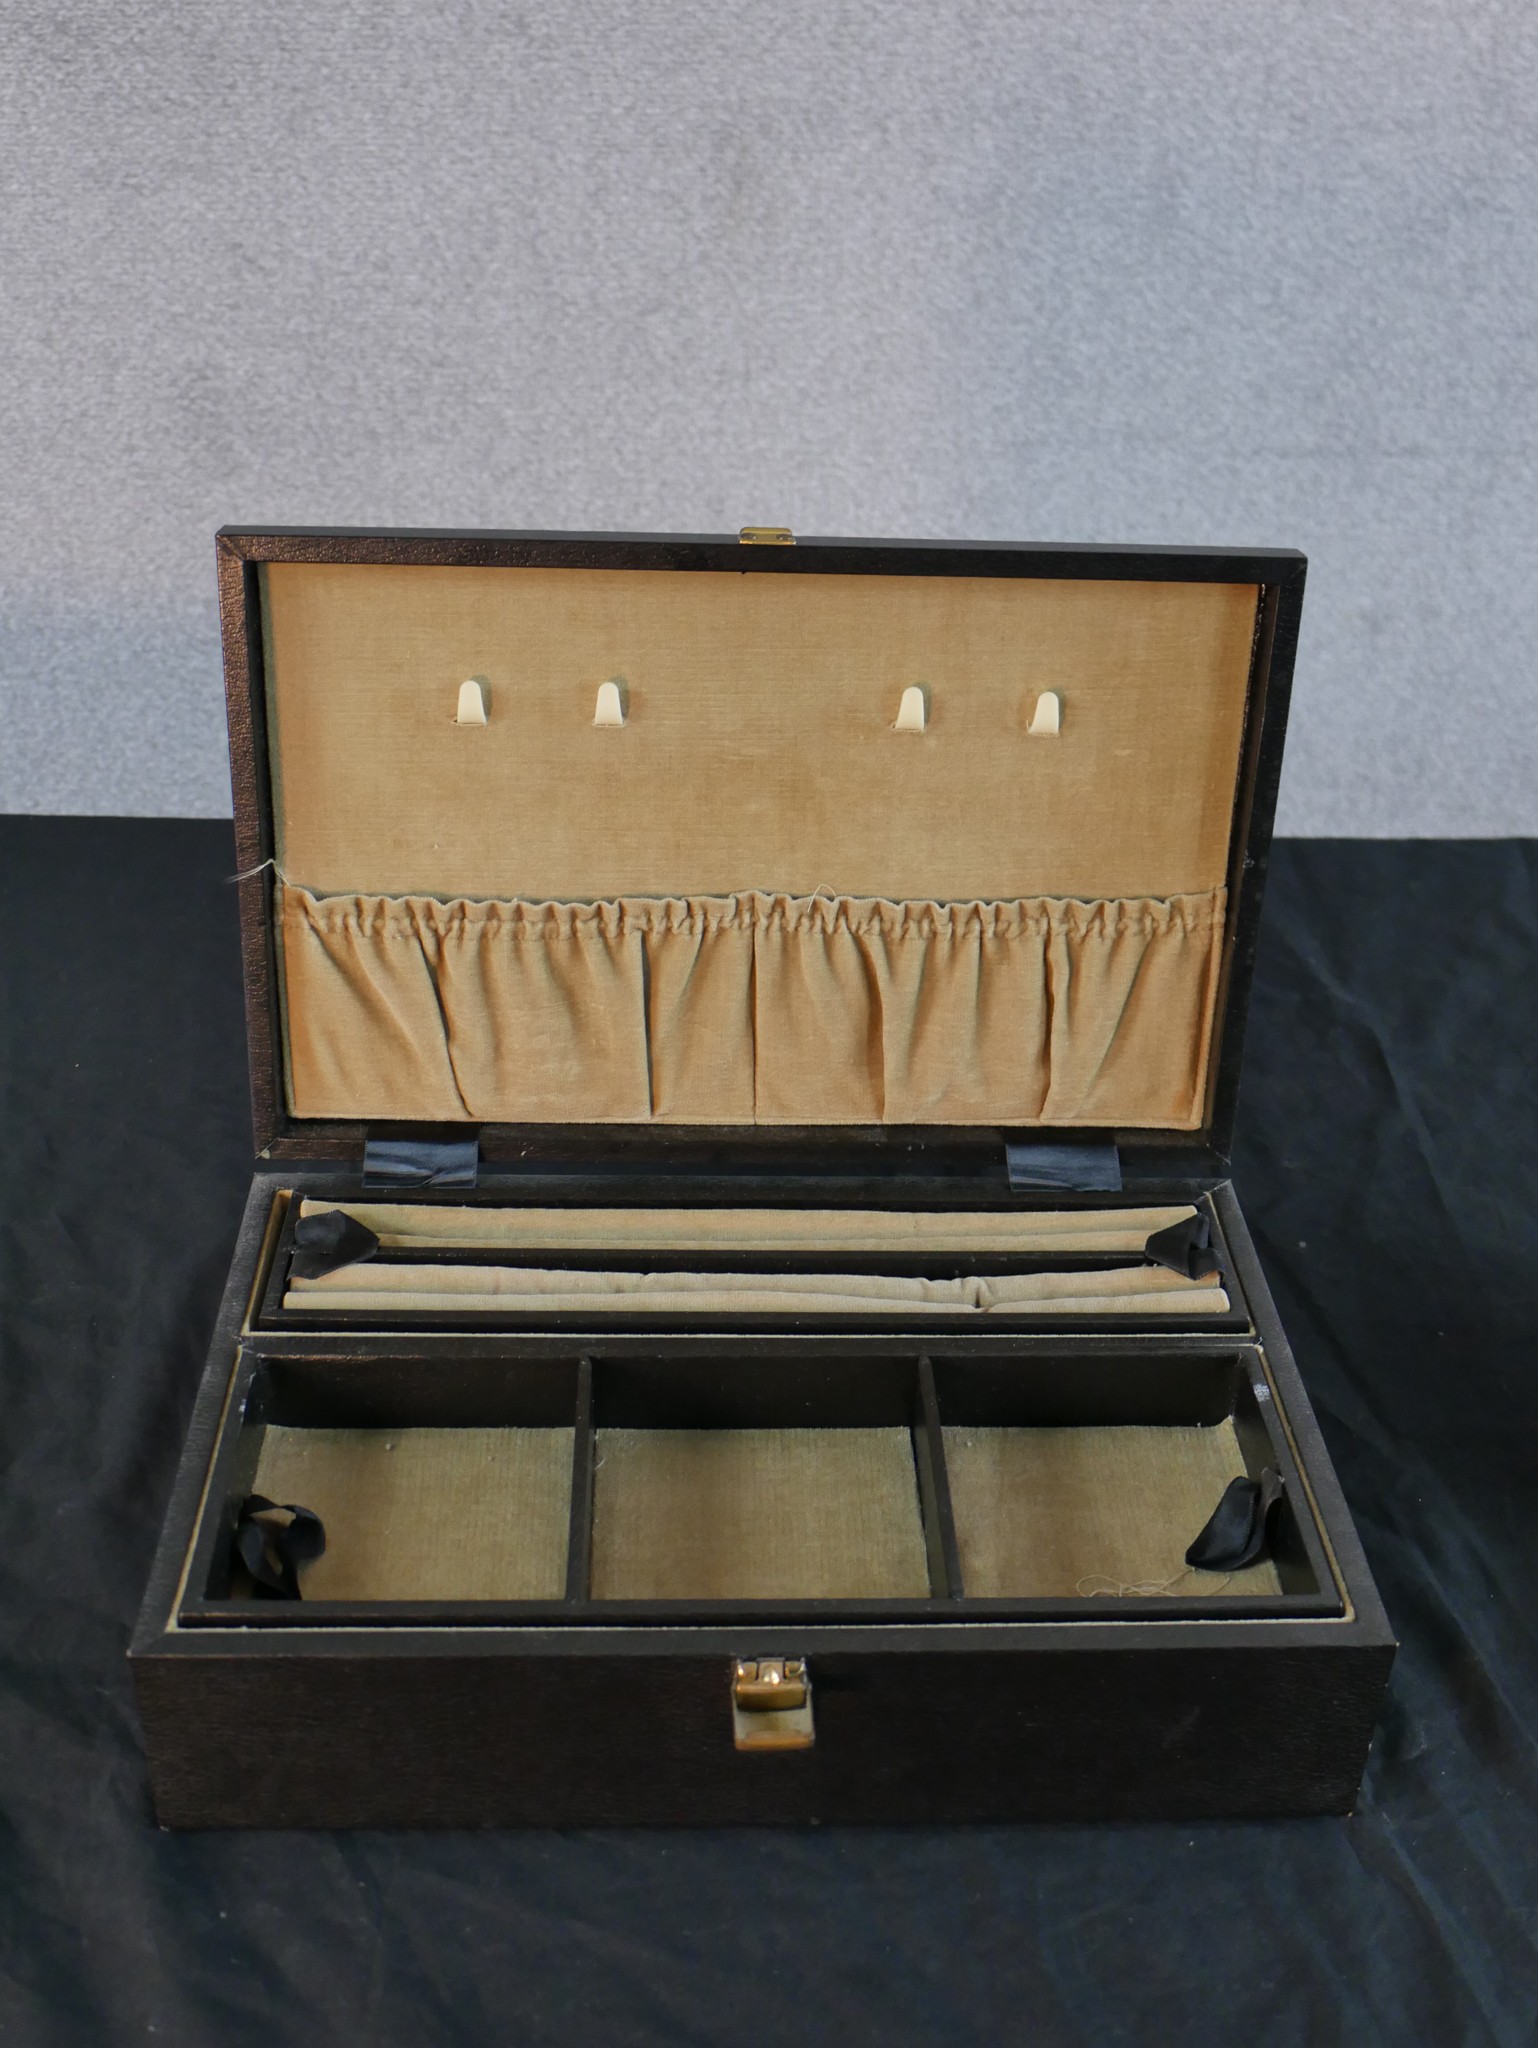 Two mid to late 20th century black faux leather jewellery boxes, one fitted and lined with red - Image 3 of 6